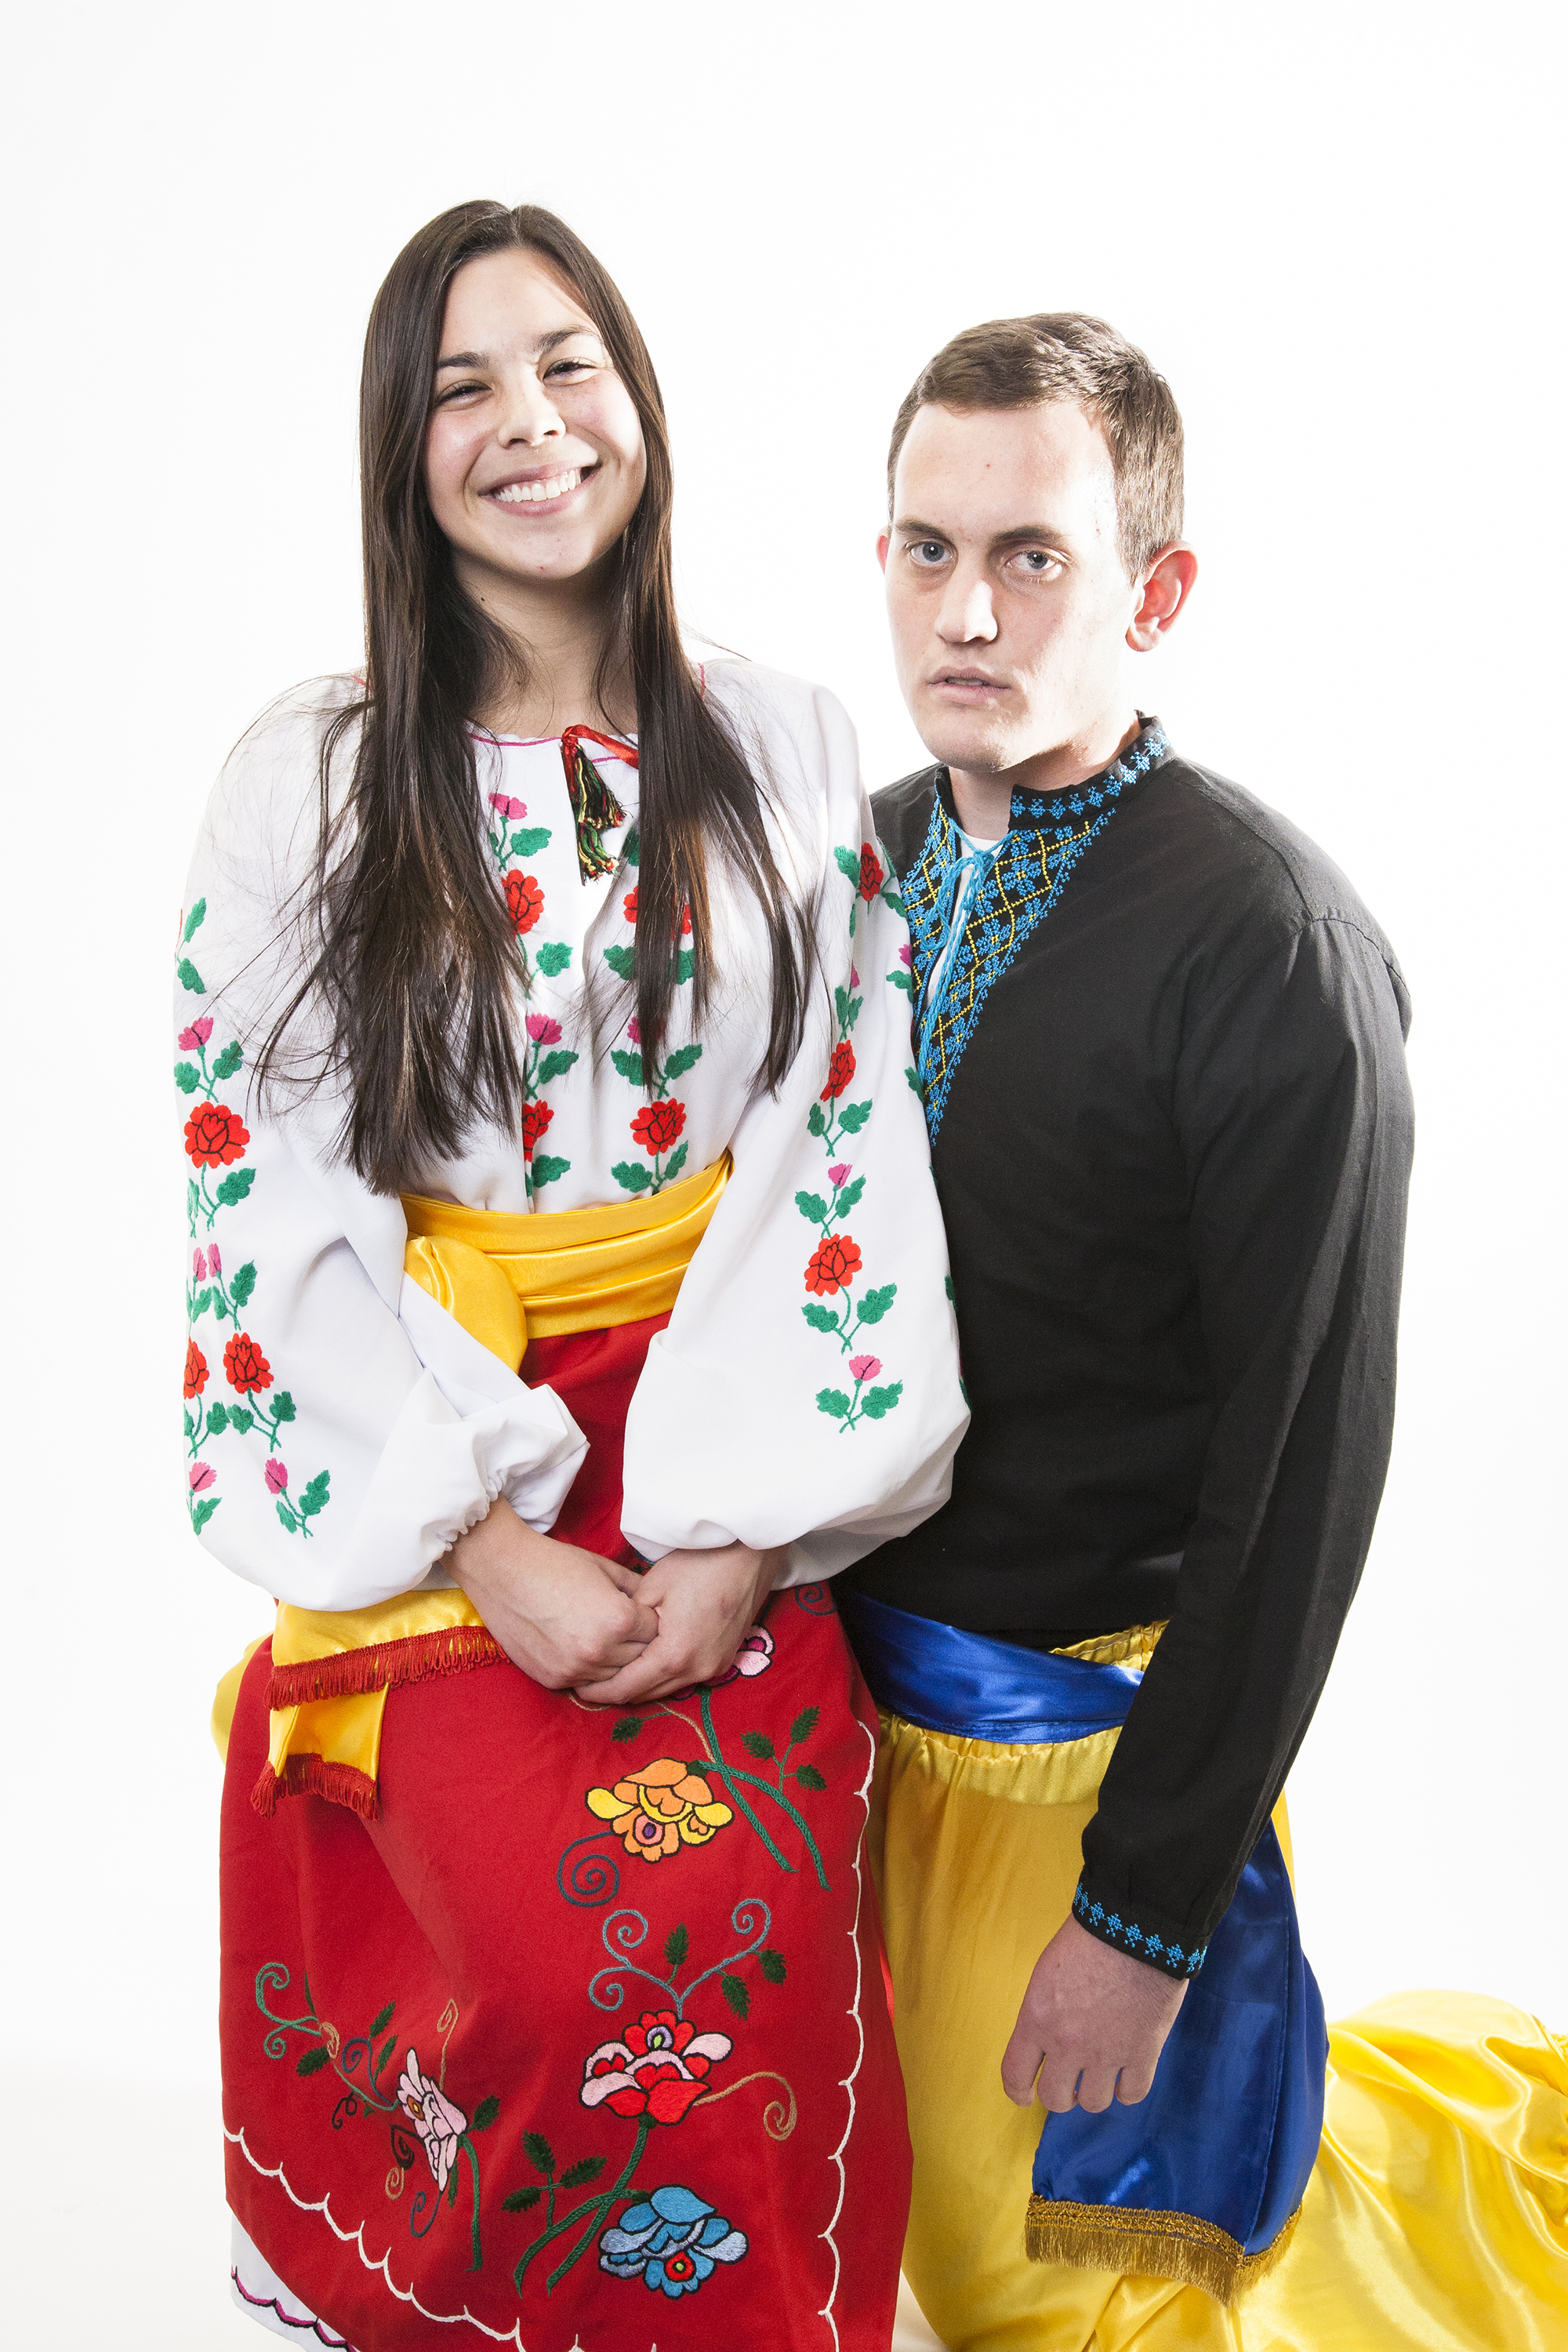 Does Traditional Russian Clothes Suitable for Modern Era? You can